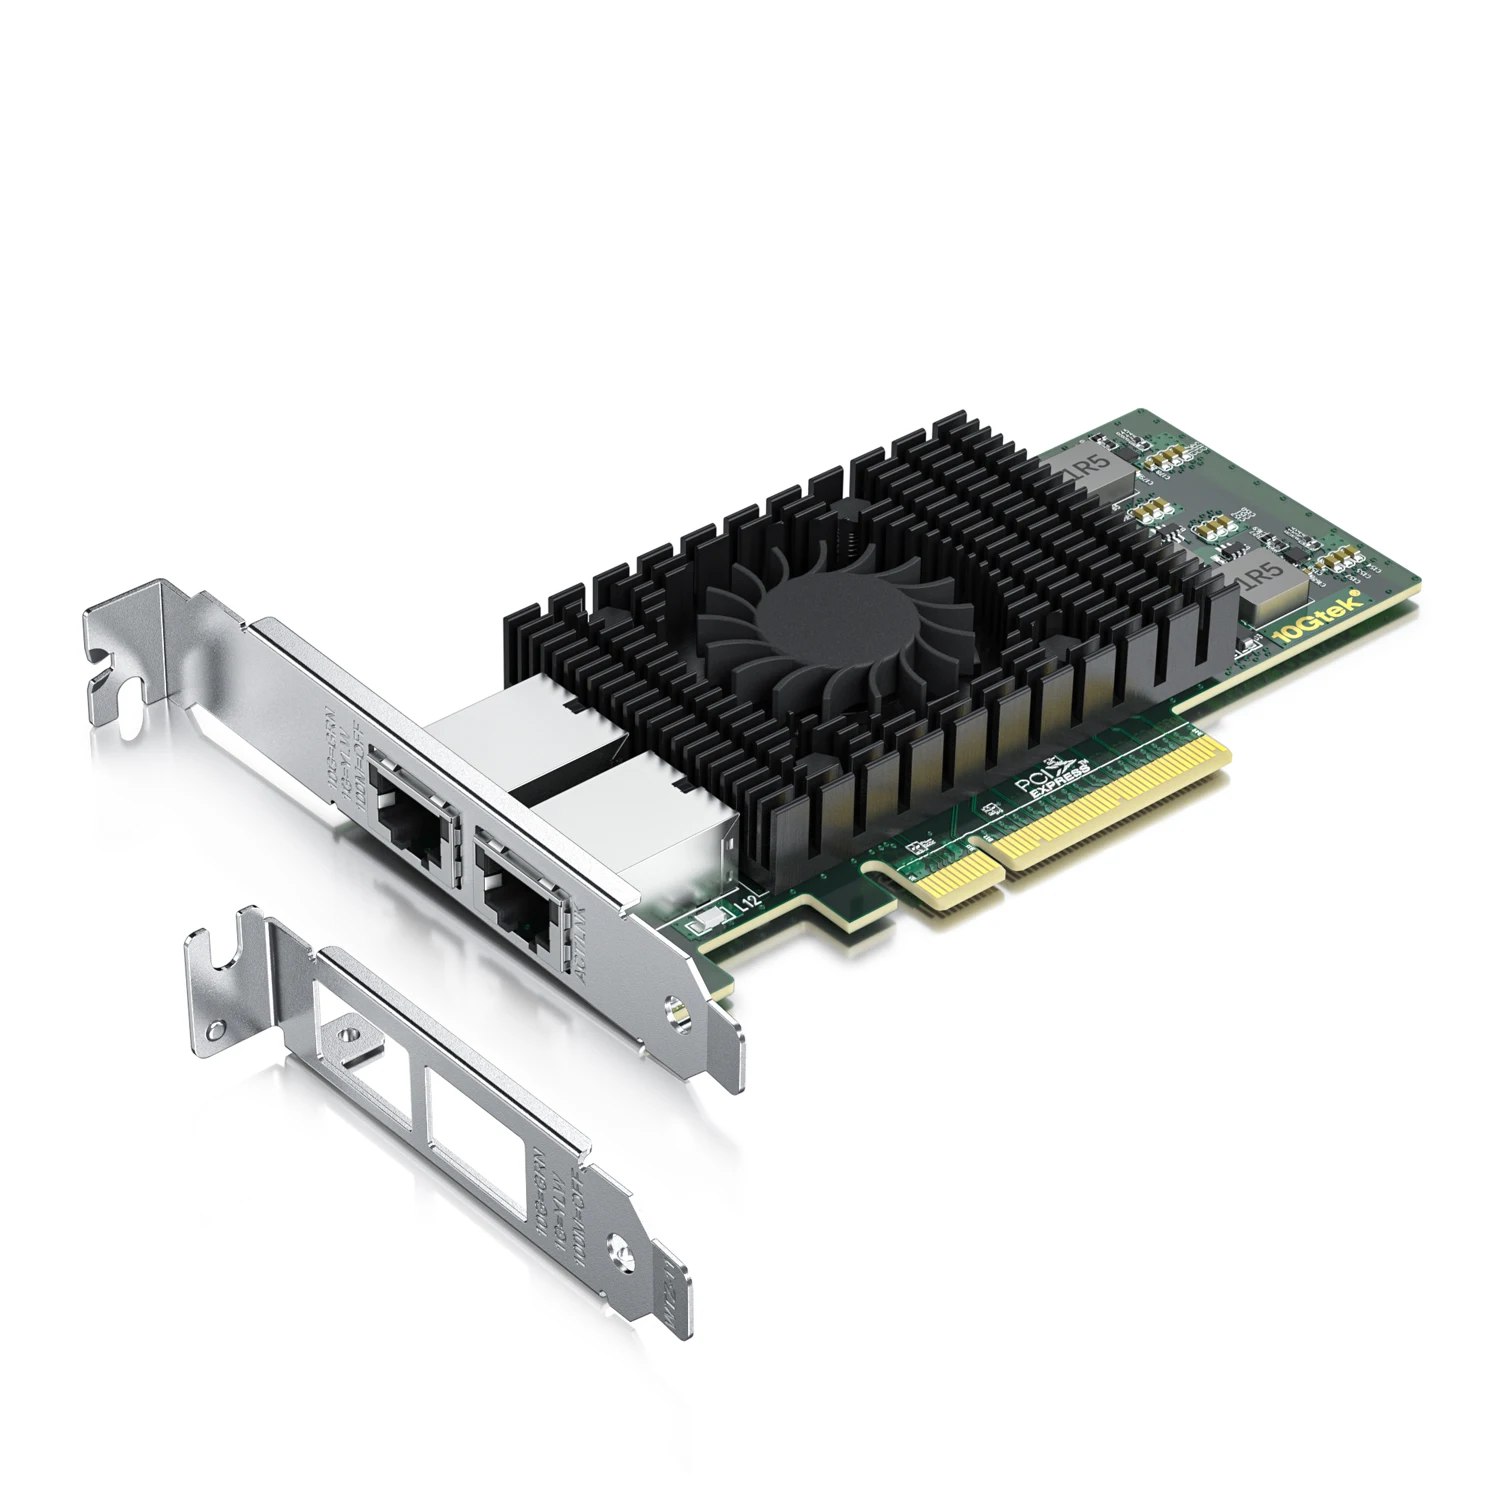 10Gb PCI-E NIC Network Card, PCI Express Ethernet LAN Adapter Support Windows Server/Windows/Linux/ESX, Compare to Intel X540-T2 devart dbforge data compare for sql server